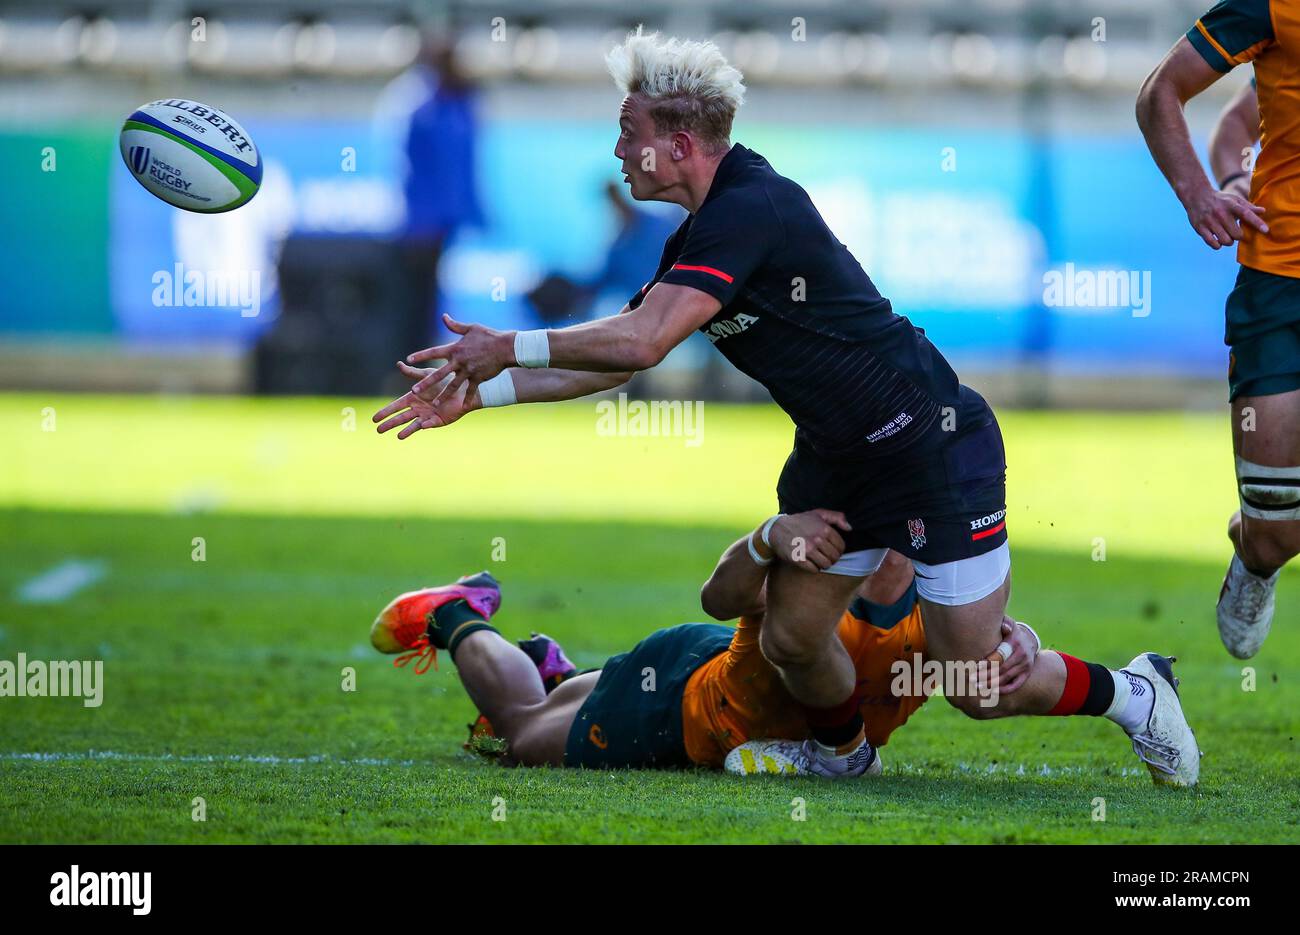 Cape Town, SOUTH AFRICA - Tuesday 04 July 2023, Sam Harris of England is tackled by Ronan Leahy of Australia during the World Rugby U20 Championship match between Australia and England at Athlone Stadium in Cape Town, South Africa. Stock Photo